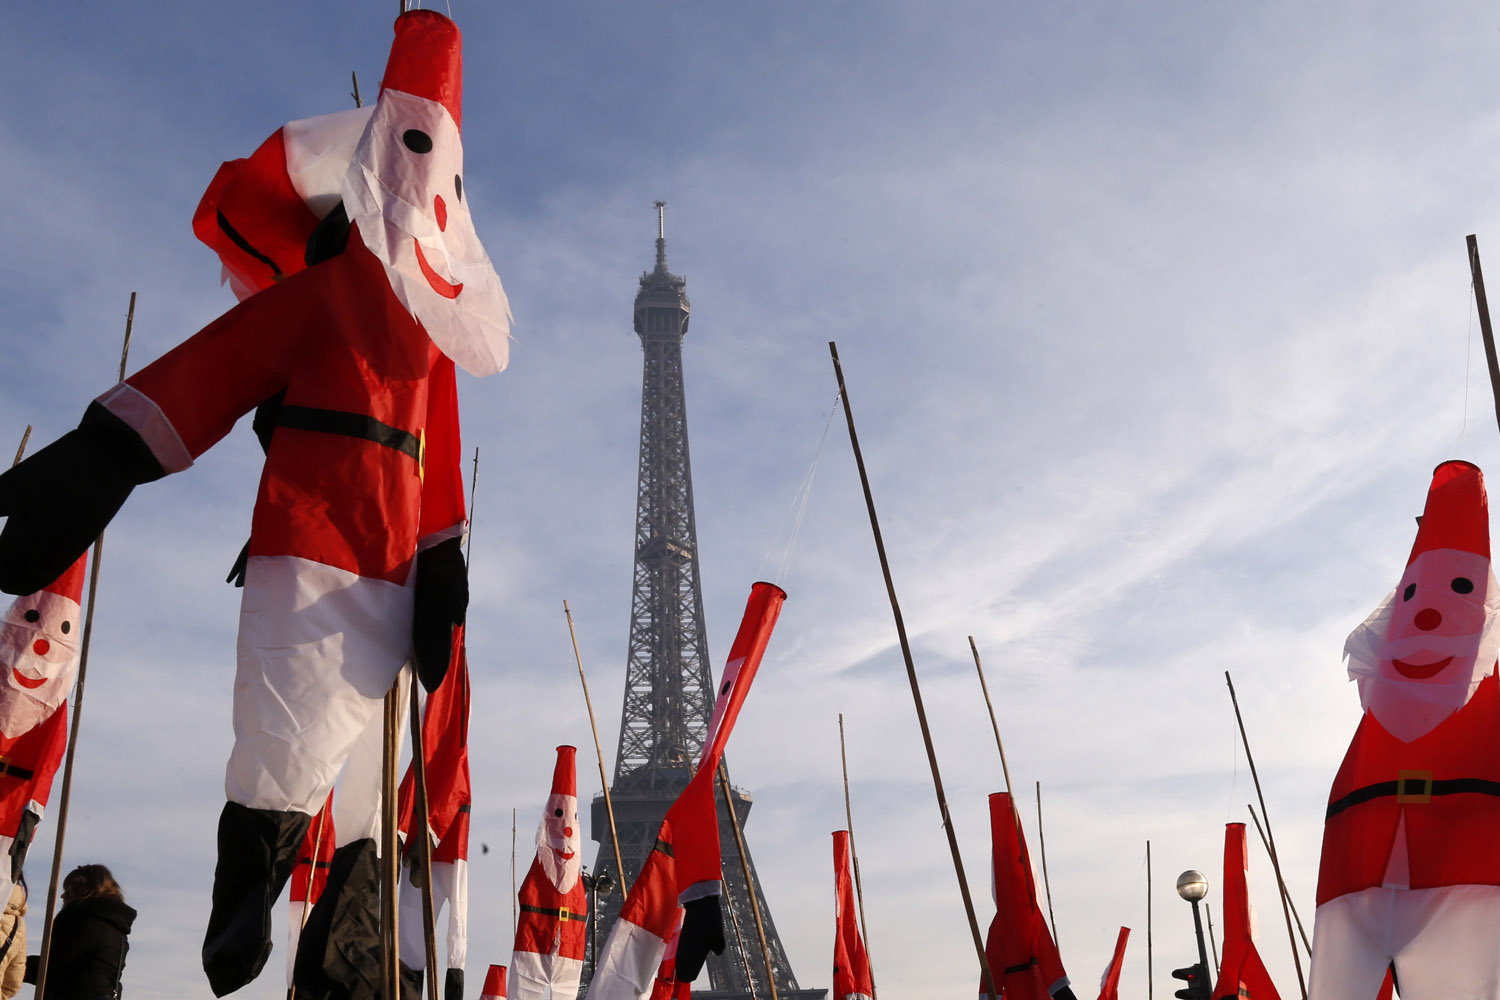 Santa Claus kites float in front of the Eiffel Tower as part of Christmas holiday season preparations in Paris